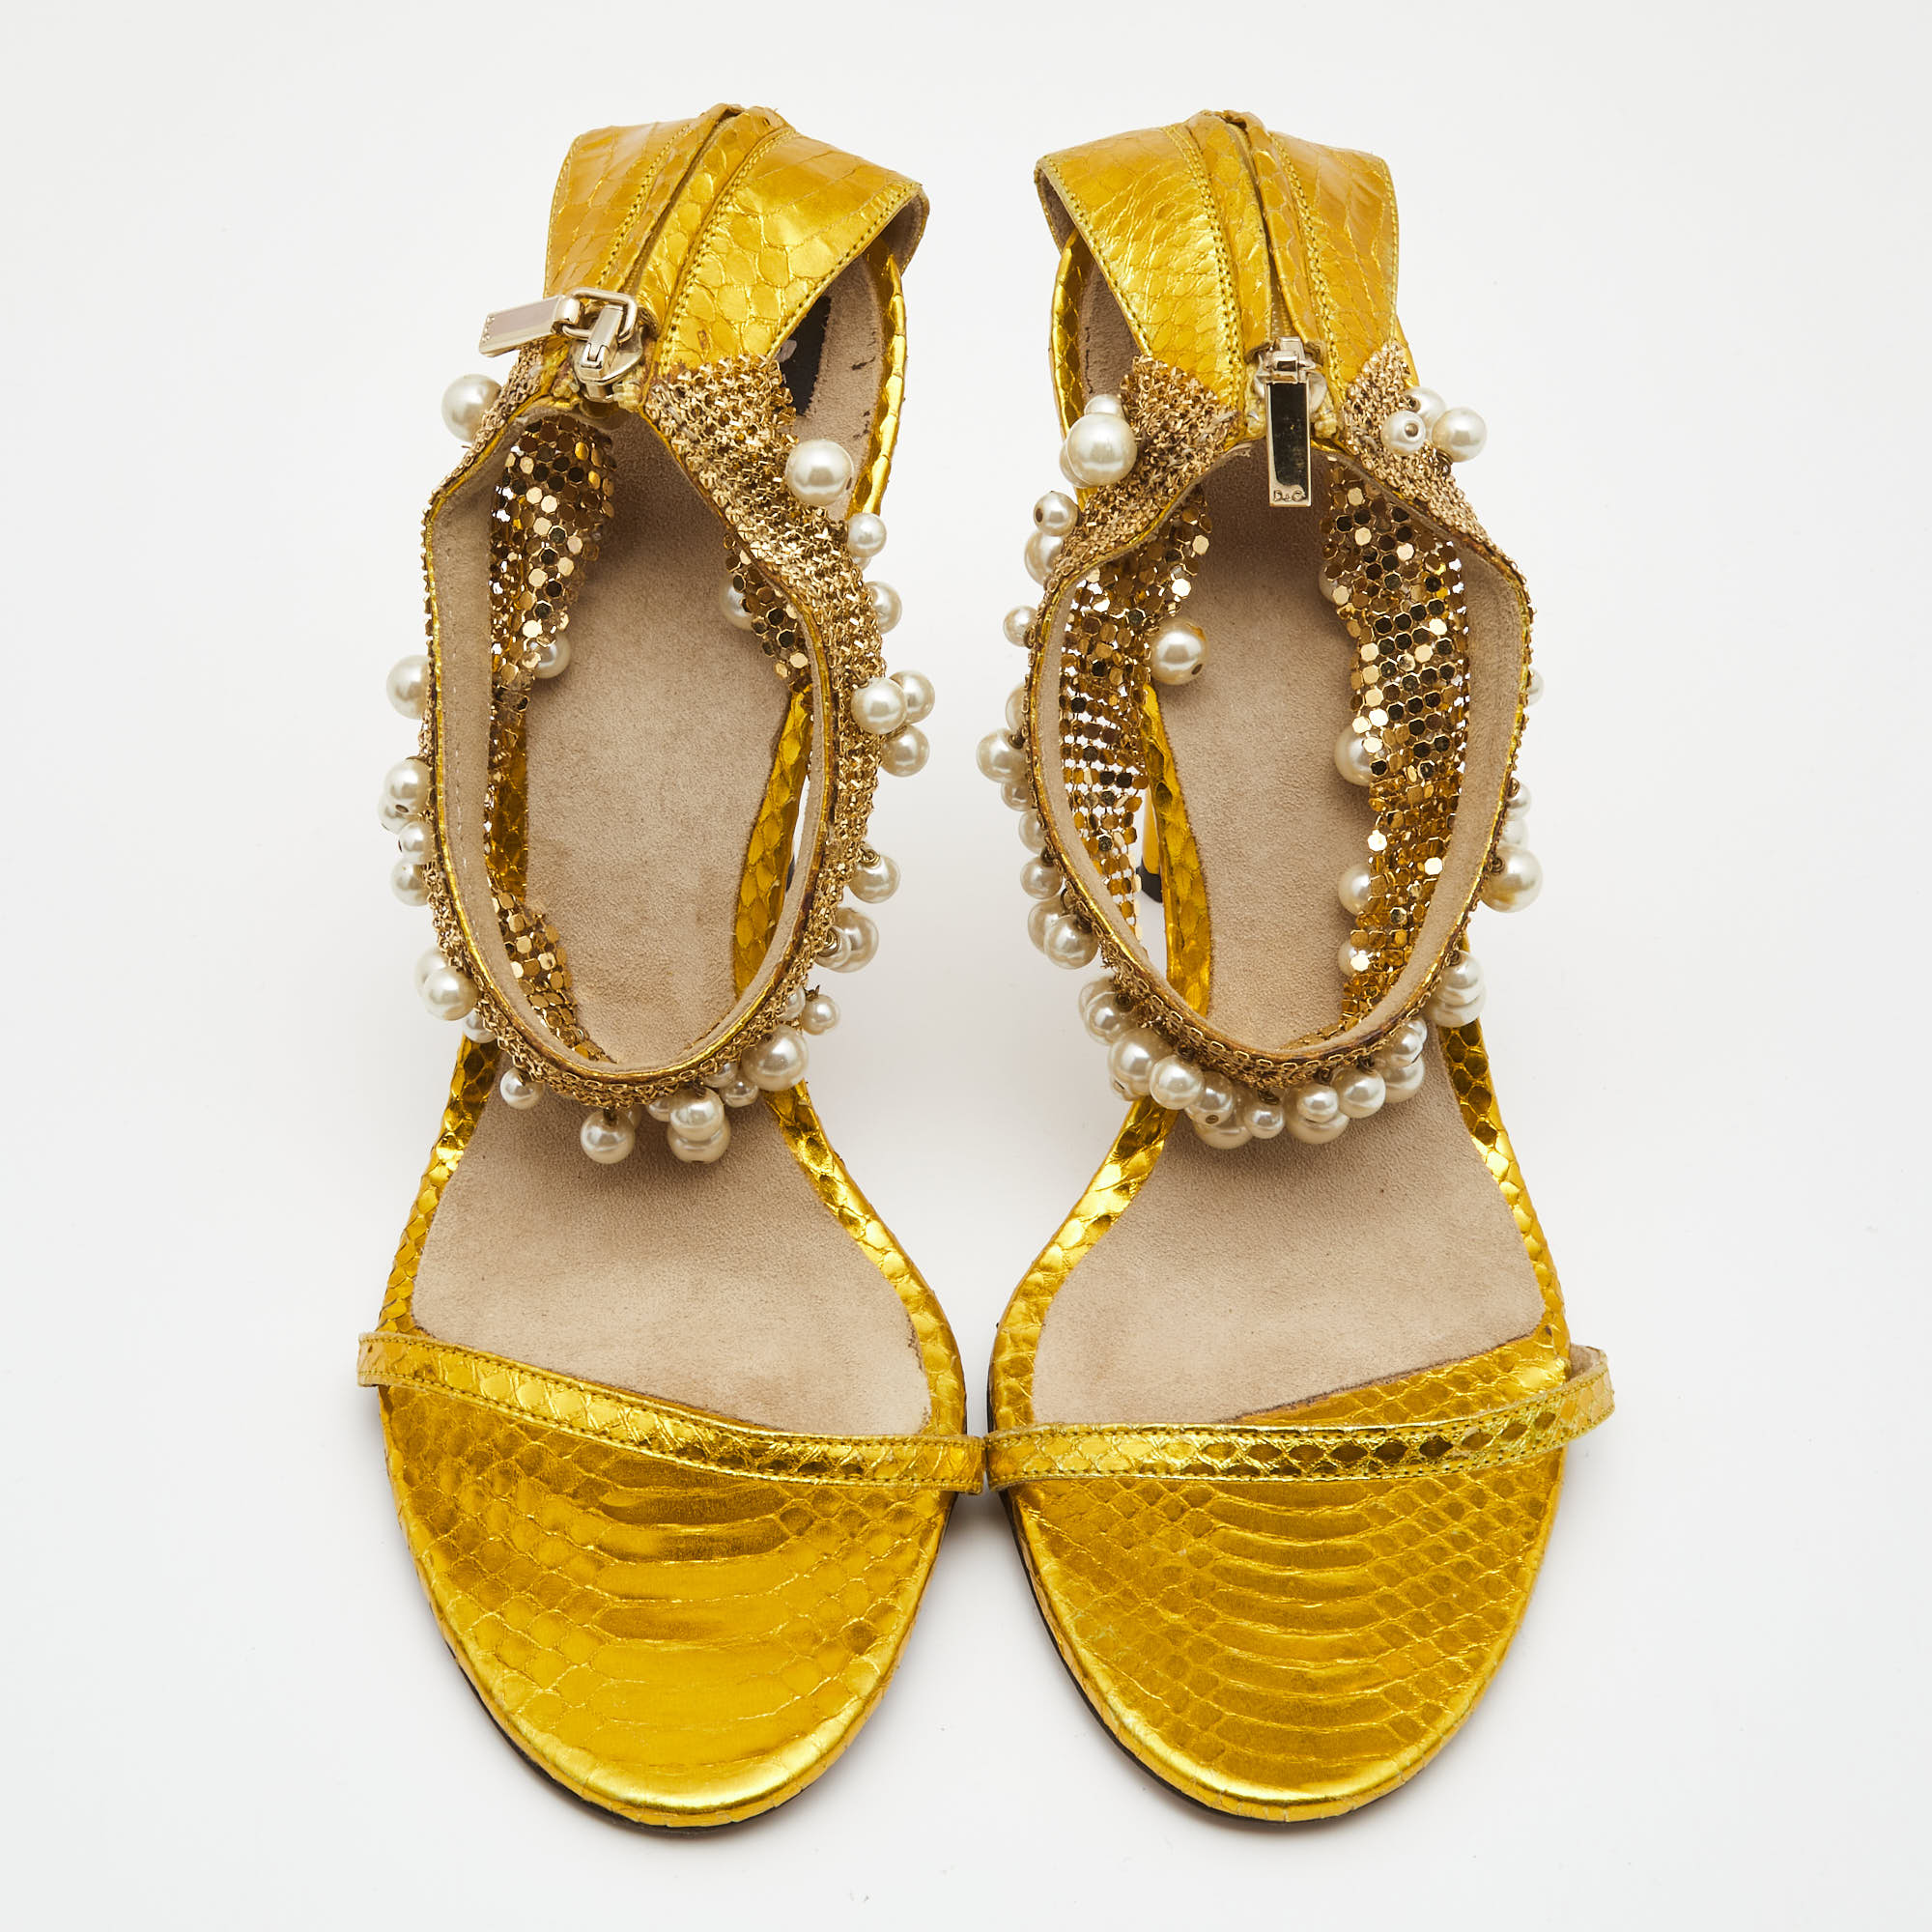 Dolce & Gabbana Metallic Yellow Python Embossed Leather Embellished Ankle Strap Sandals Size 40